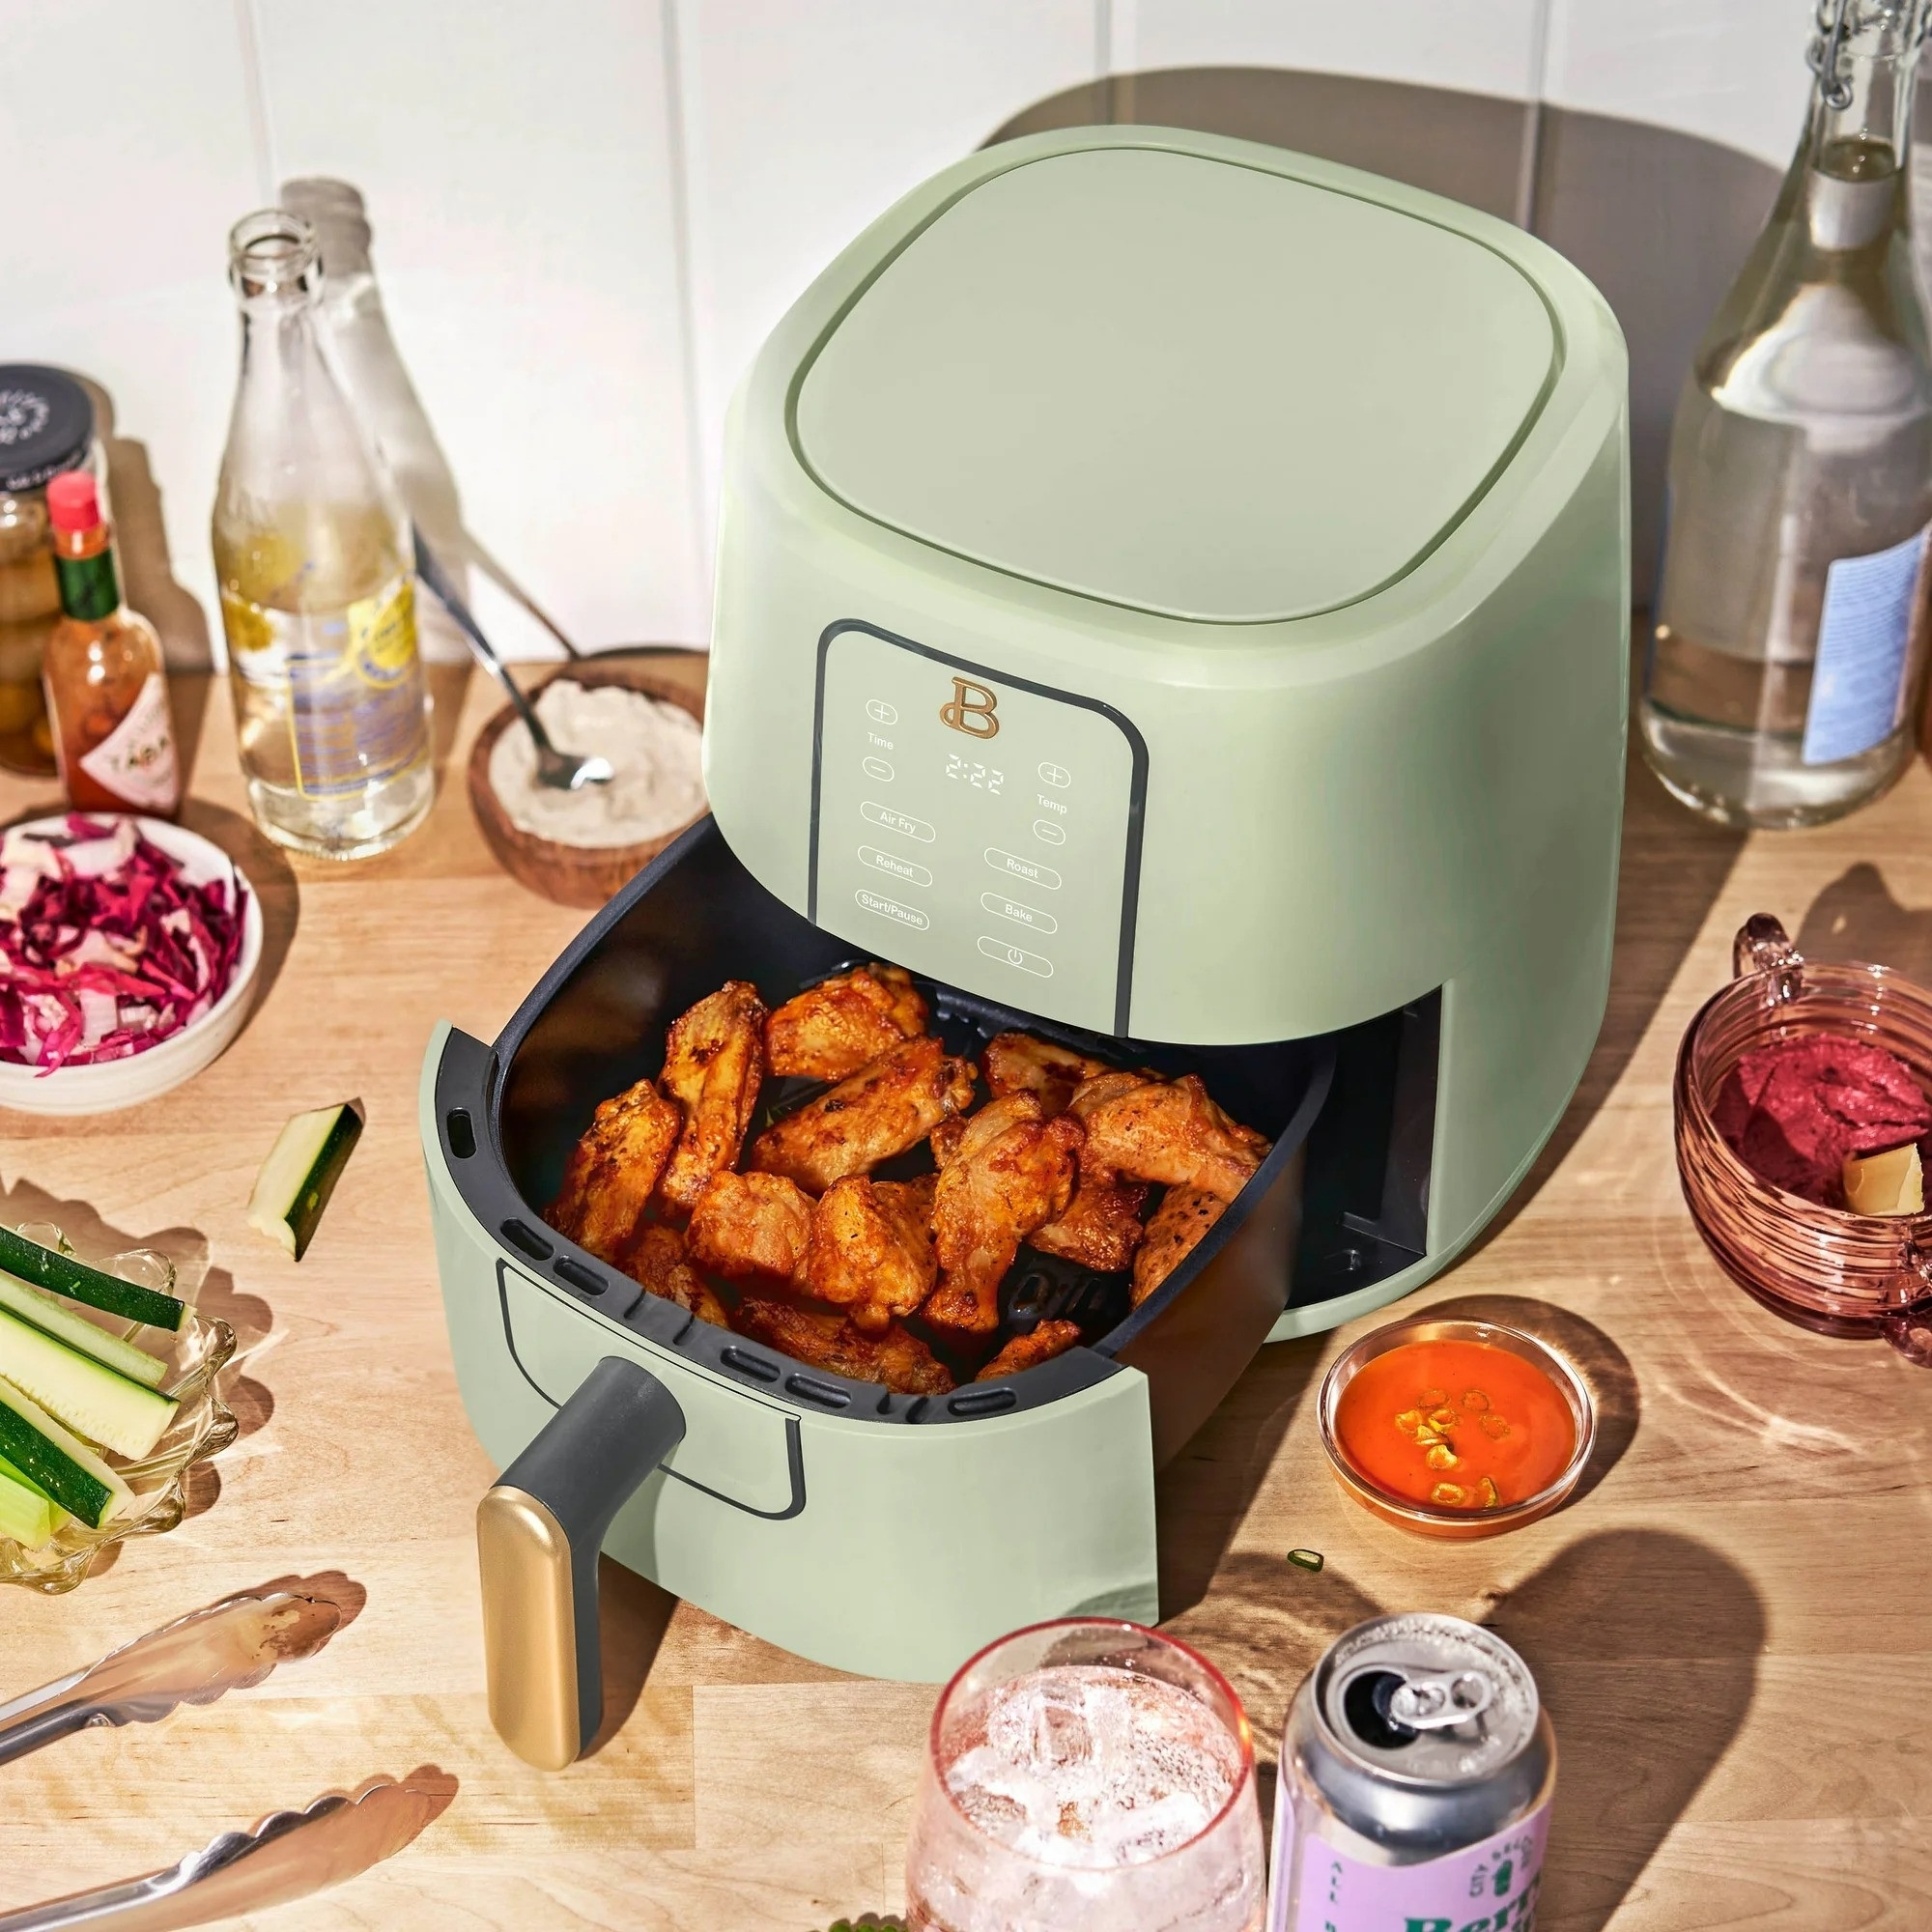 A green air fryer with its tray pulled out, displaying cooked chicken wings, on a kitchen counter among various condiments